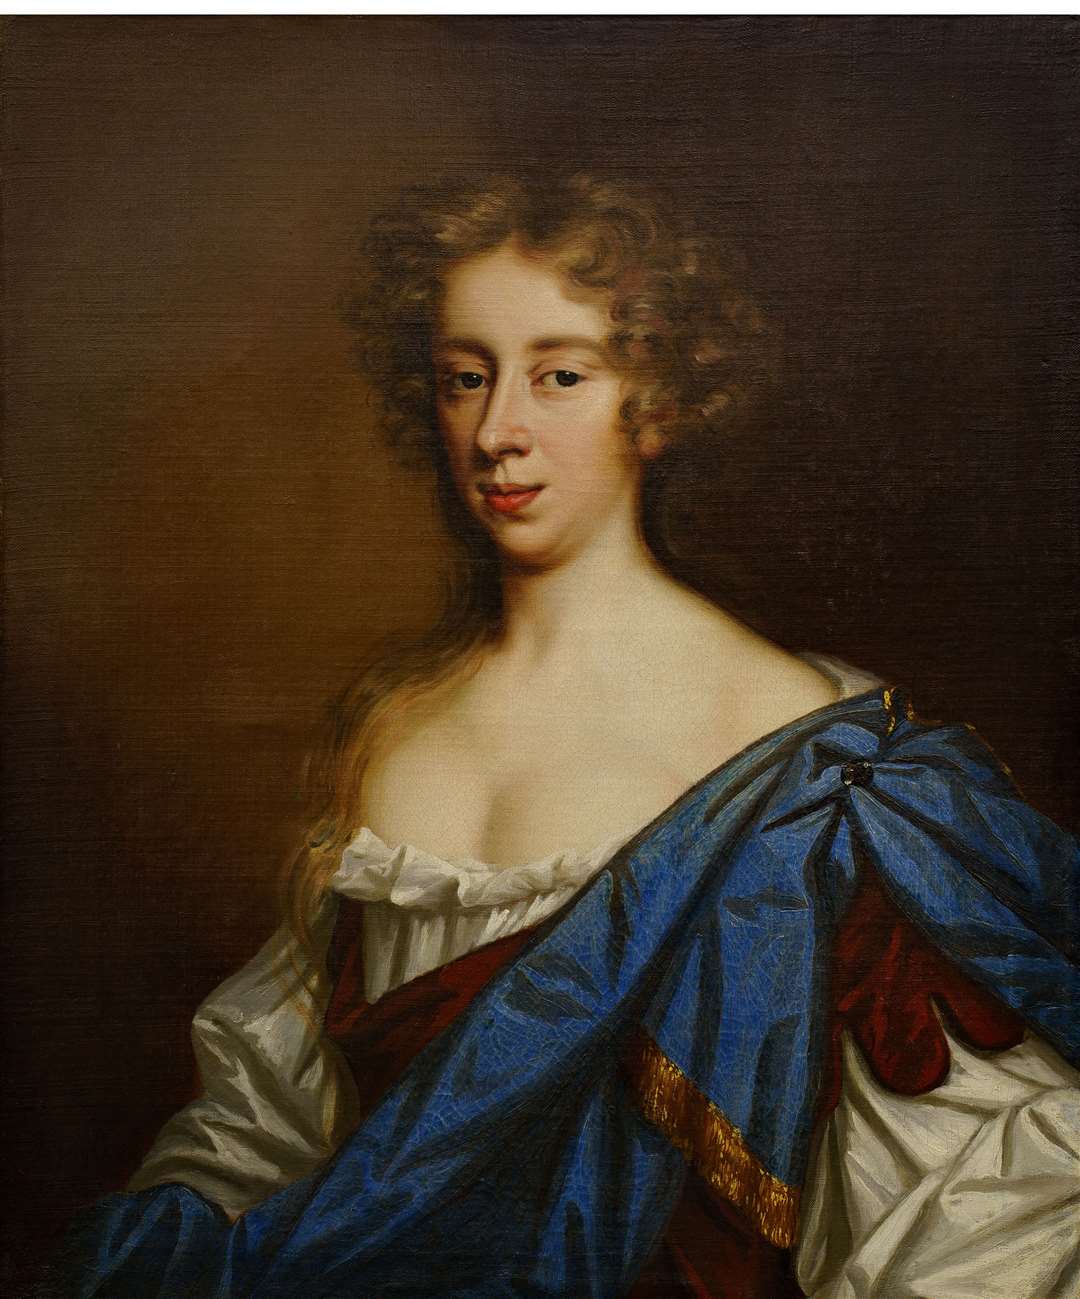 Lady Margaret Twisden by Mary Beale. Picture Moyses Hall Museum